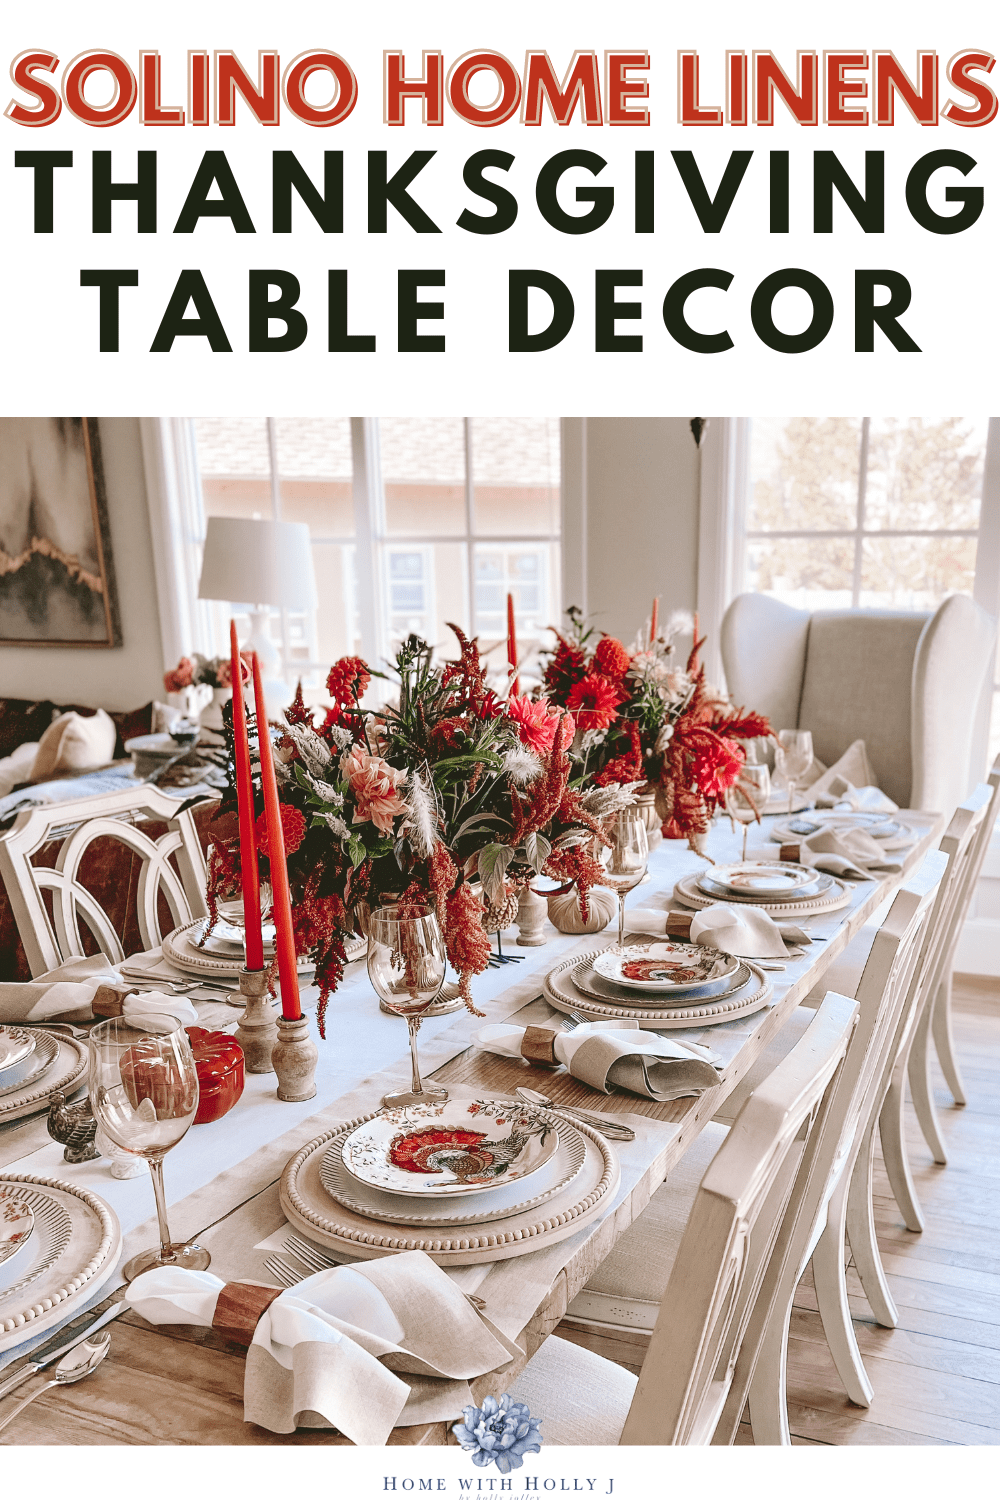 Set the mood for your Thanksgiving celebration with Solino Home's stunning linens, turning an ordinary table into a visual masterpiece. Learn more.